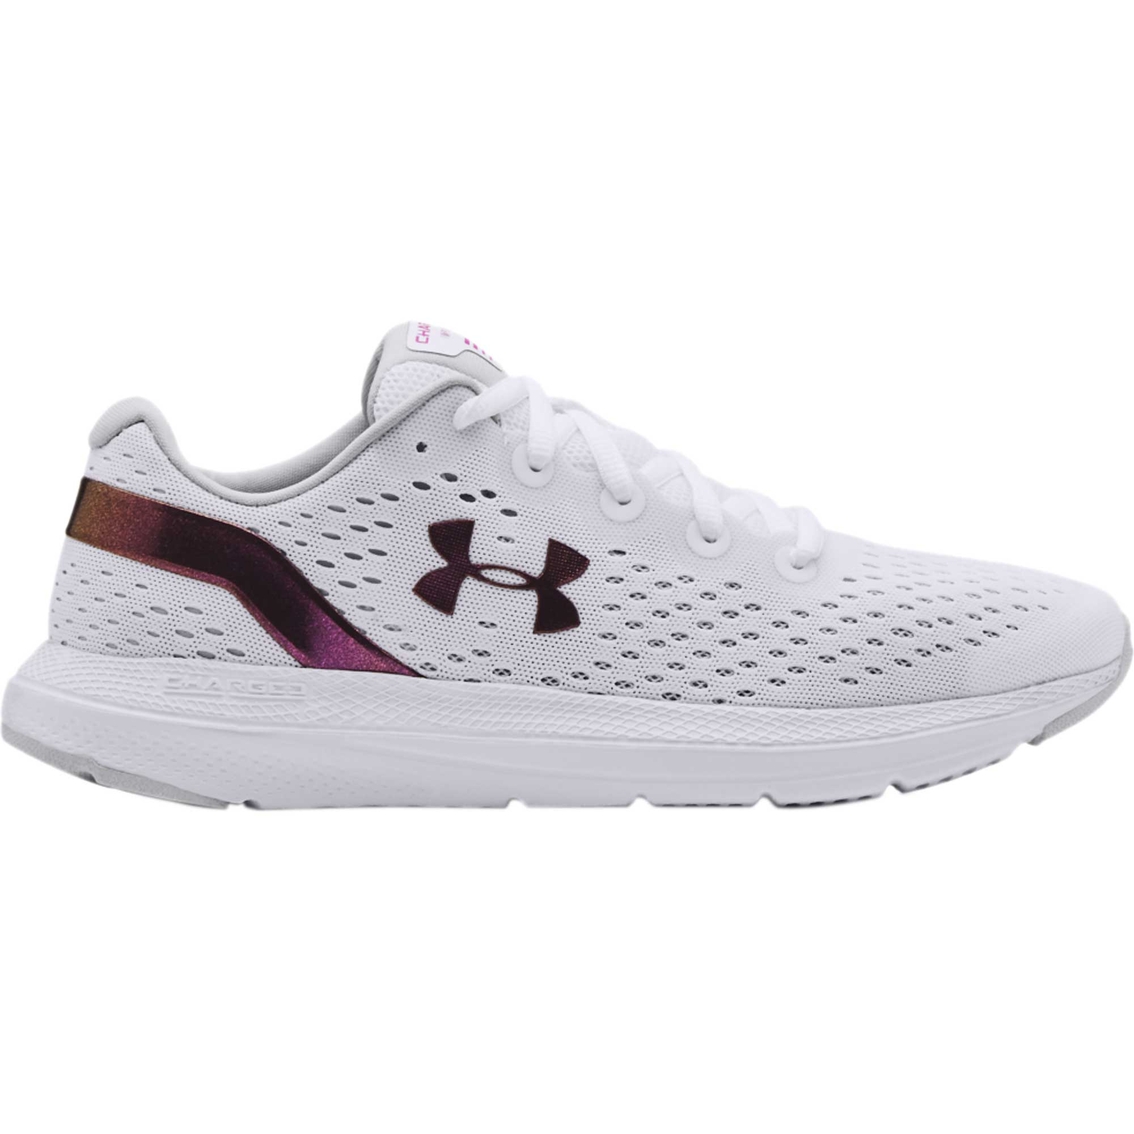 Under Armour Women's Ua Charged Impulse Shft Running Shoes | Running ...